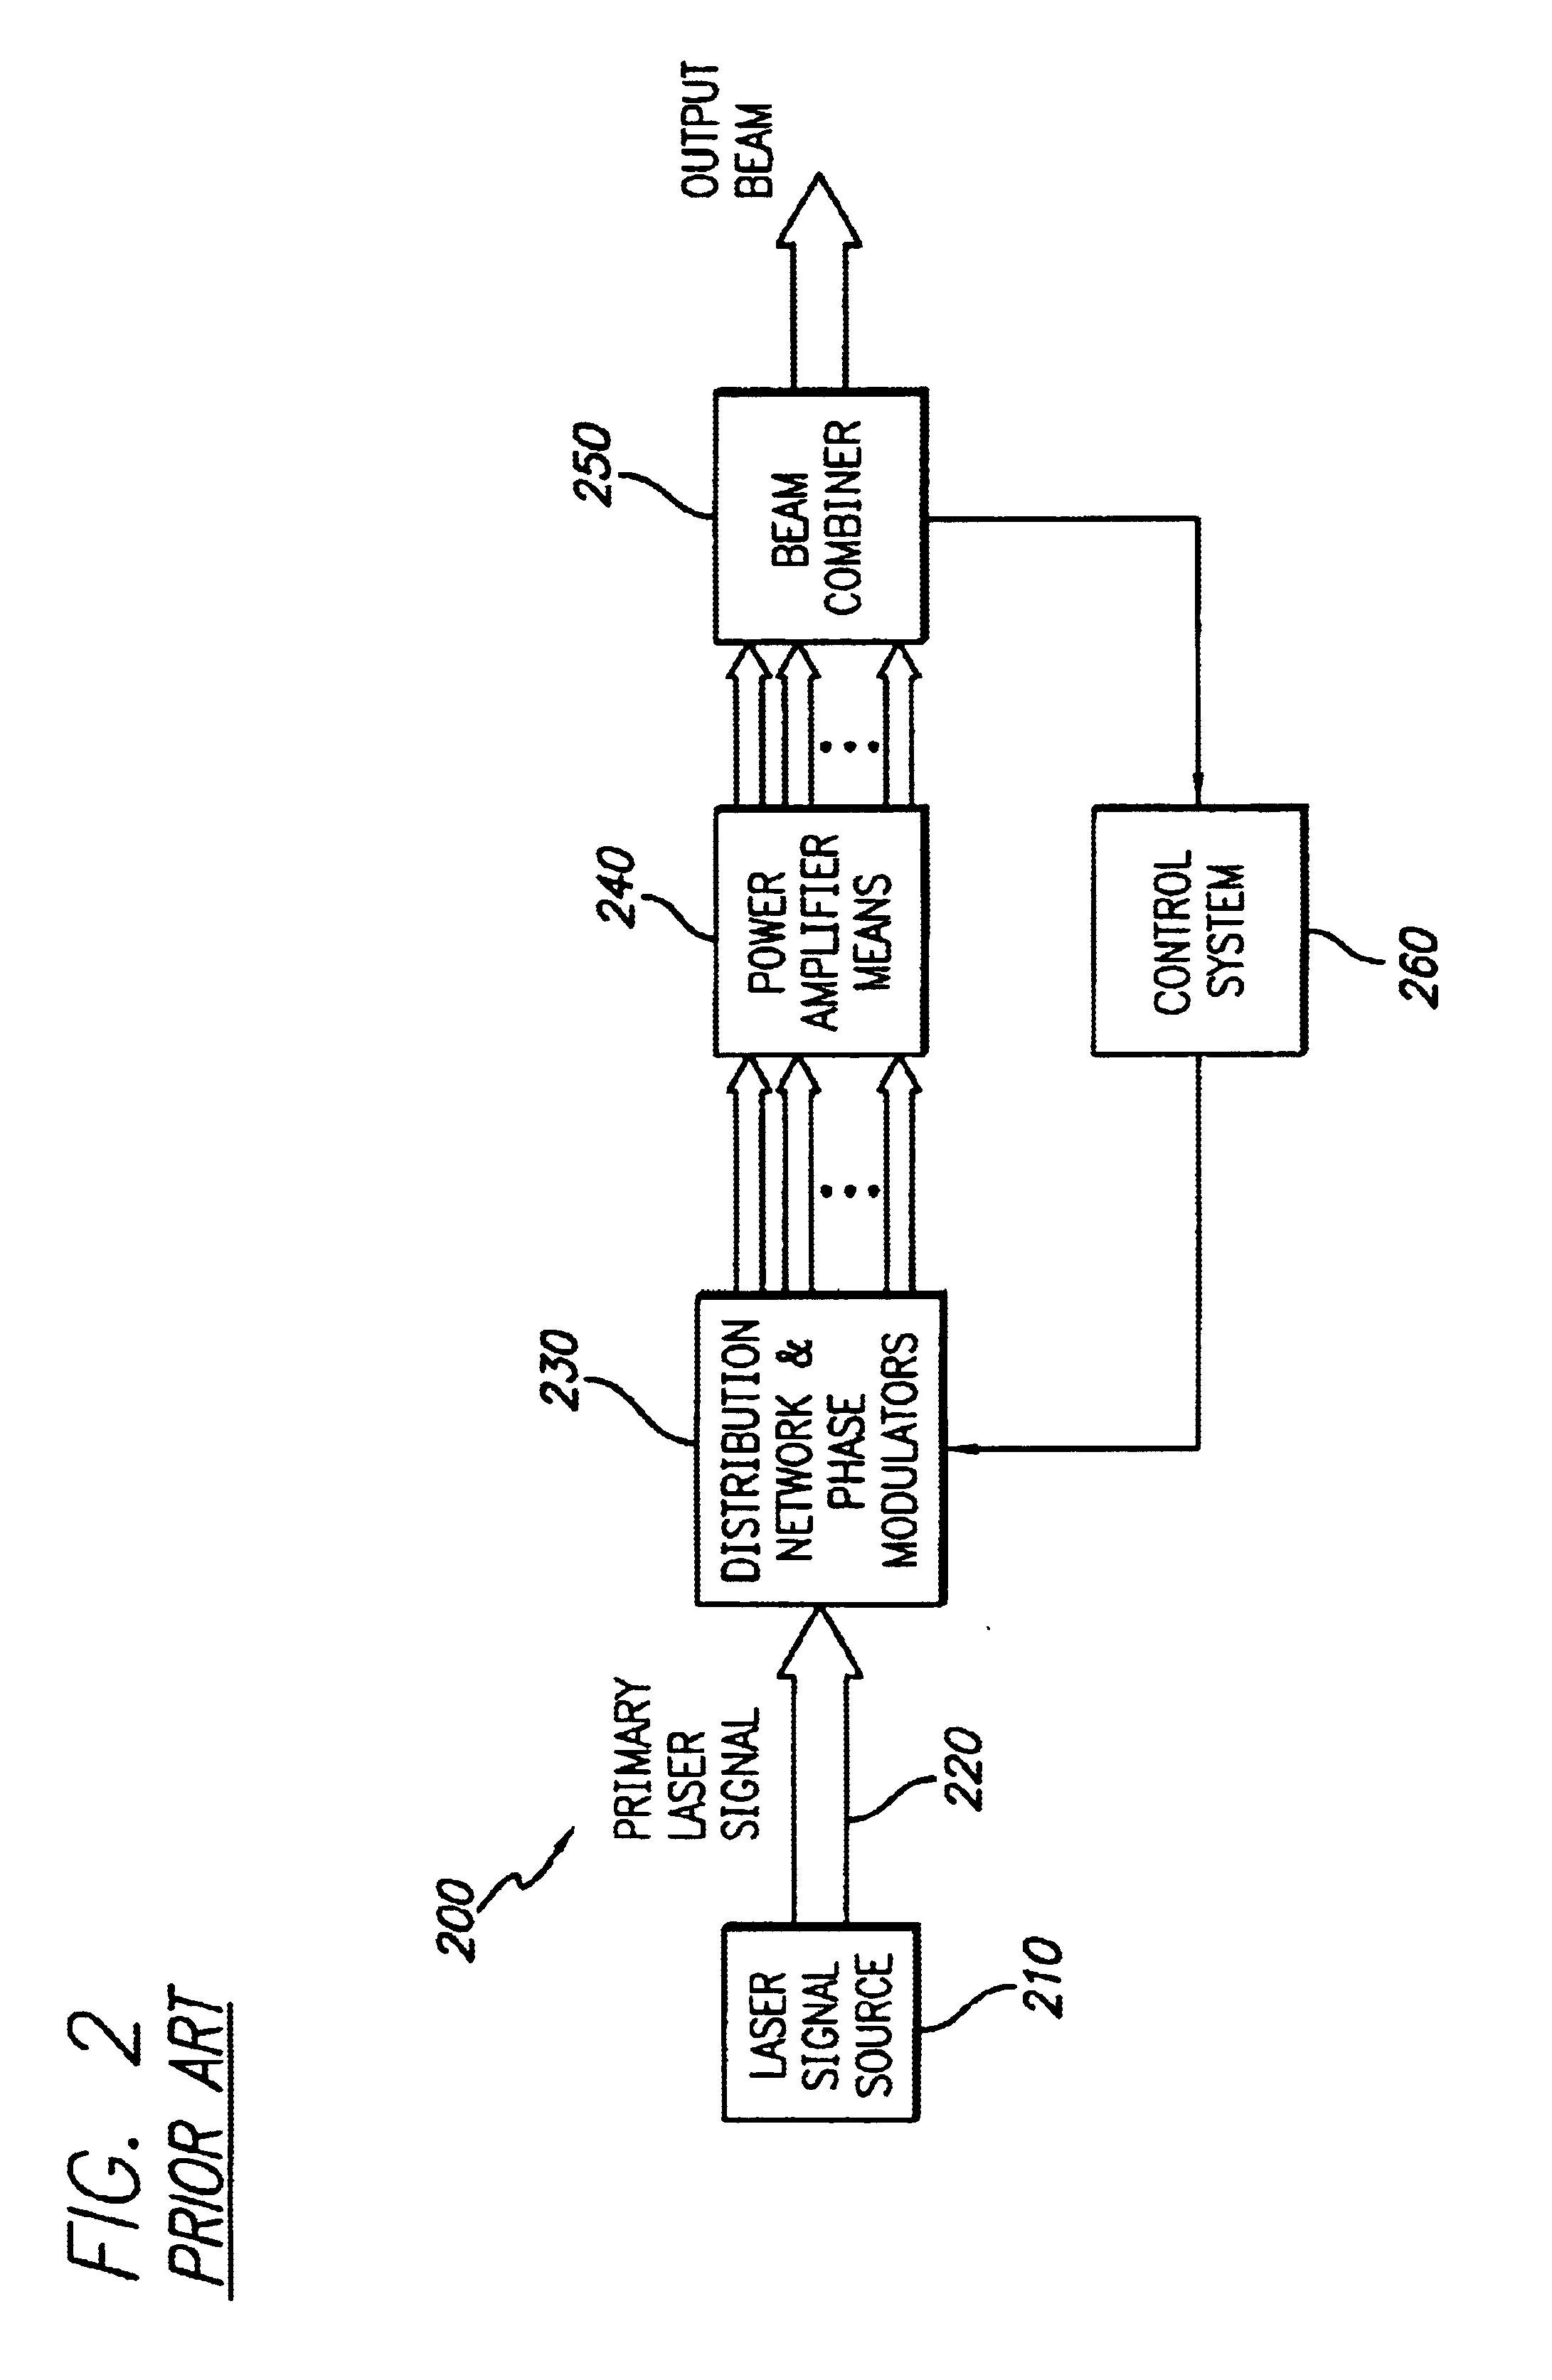 System and method for effecting high-power beam control with adaptive optics in low power beam path